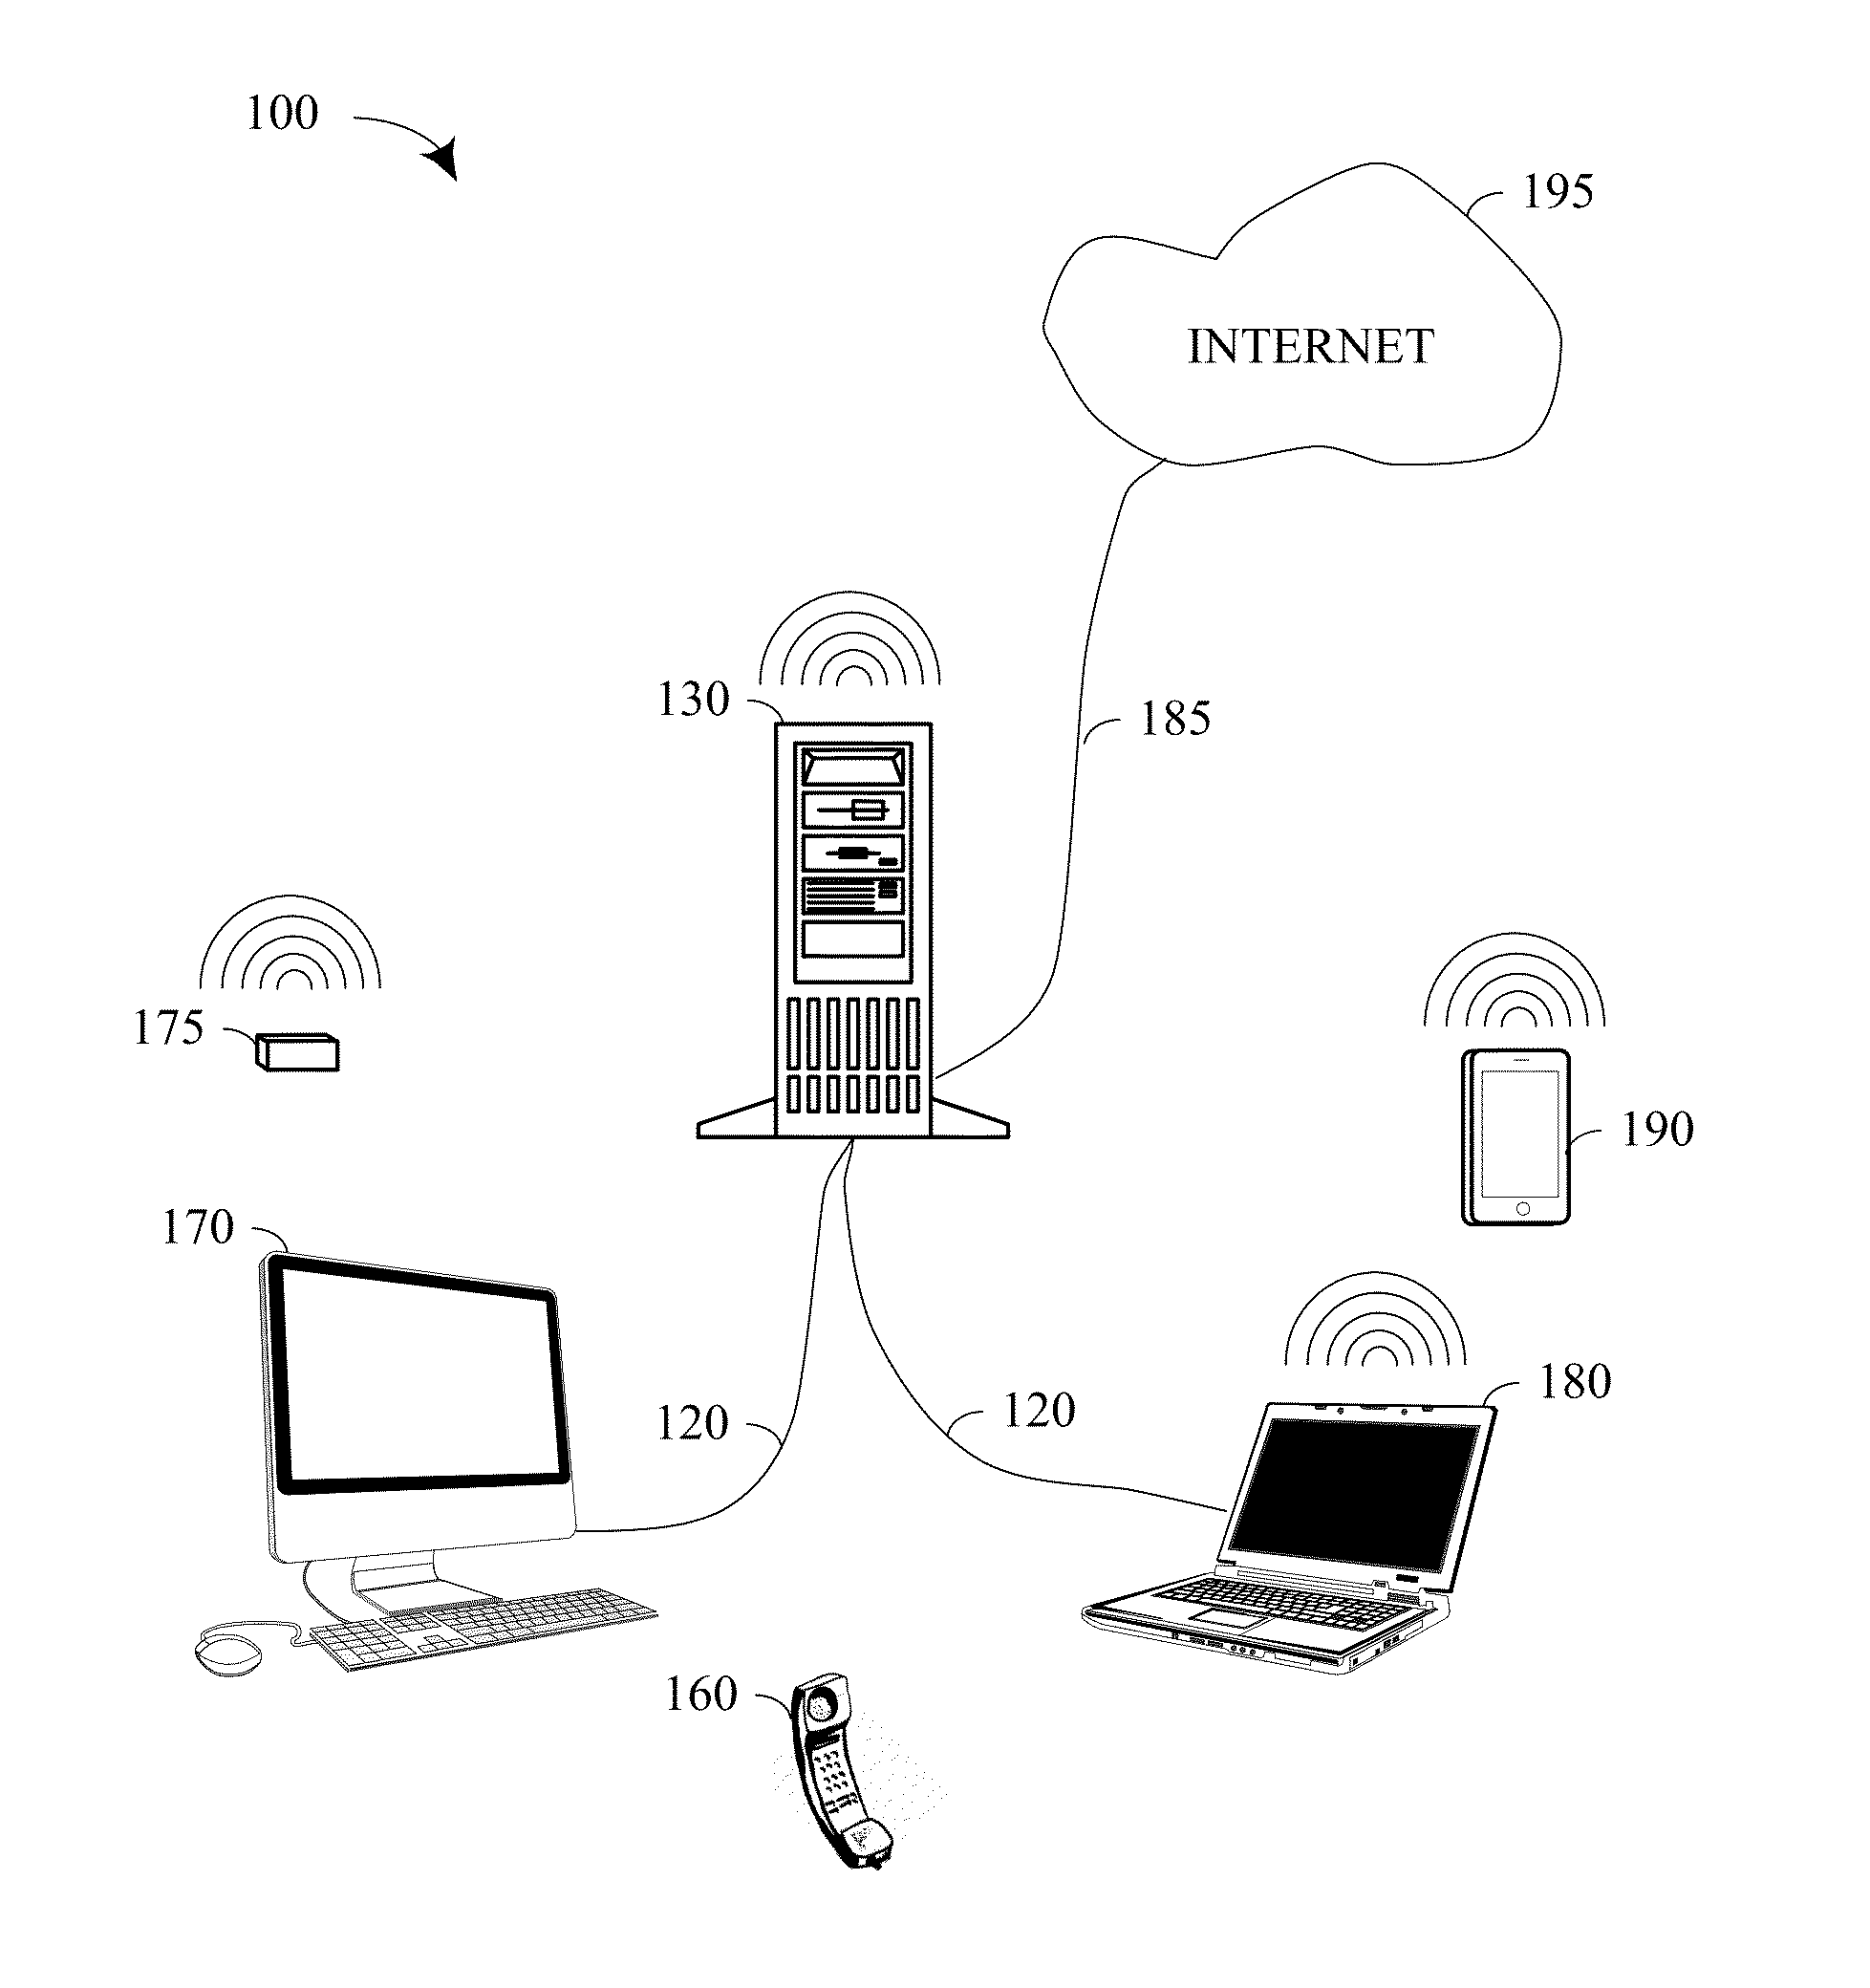 System and method for optimized message creation and delivery